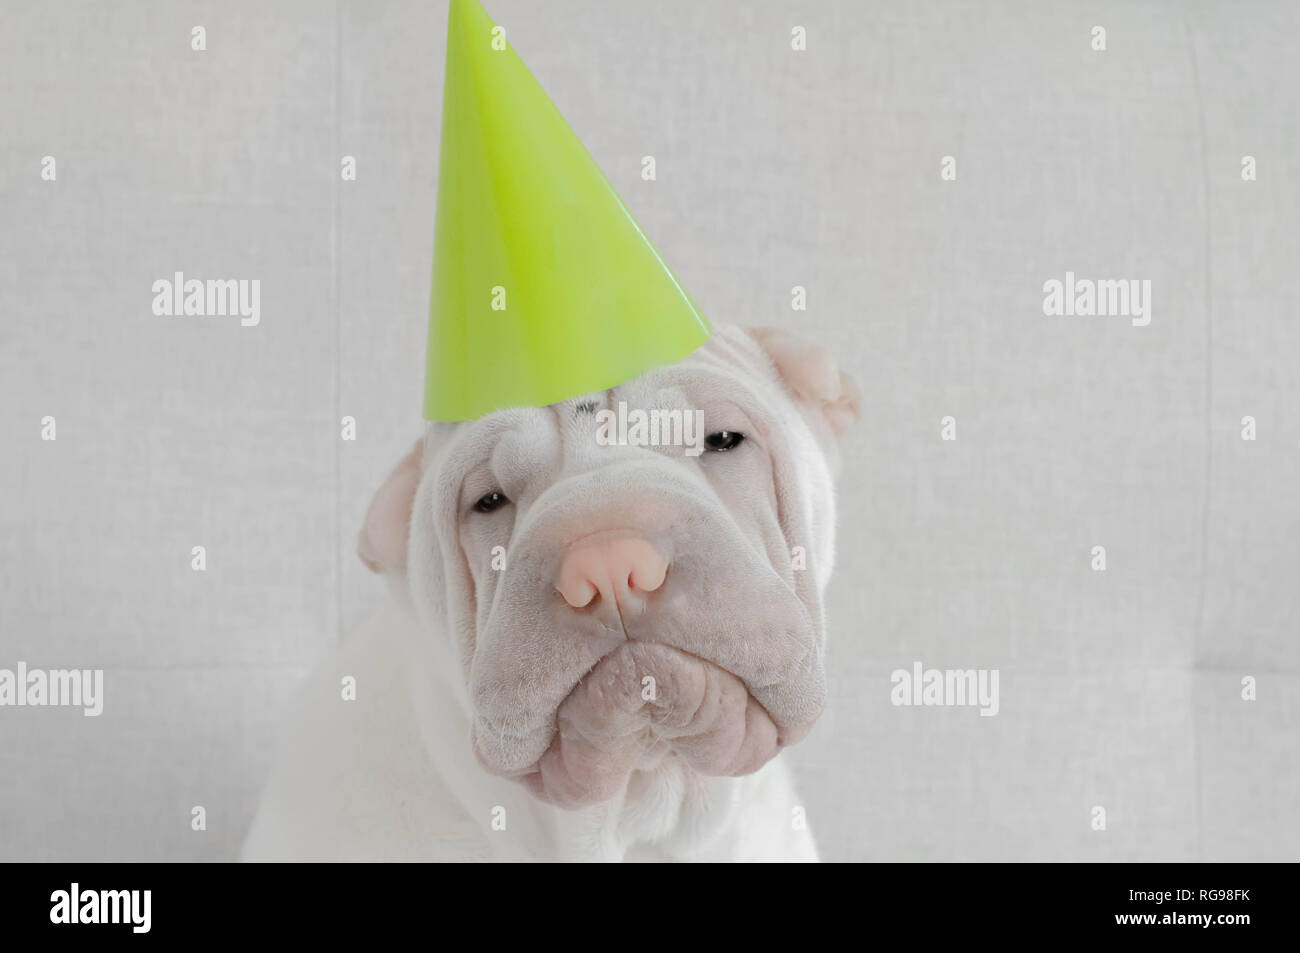 Shar-pei puppy dog wearing a party hat Stock Photo